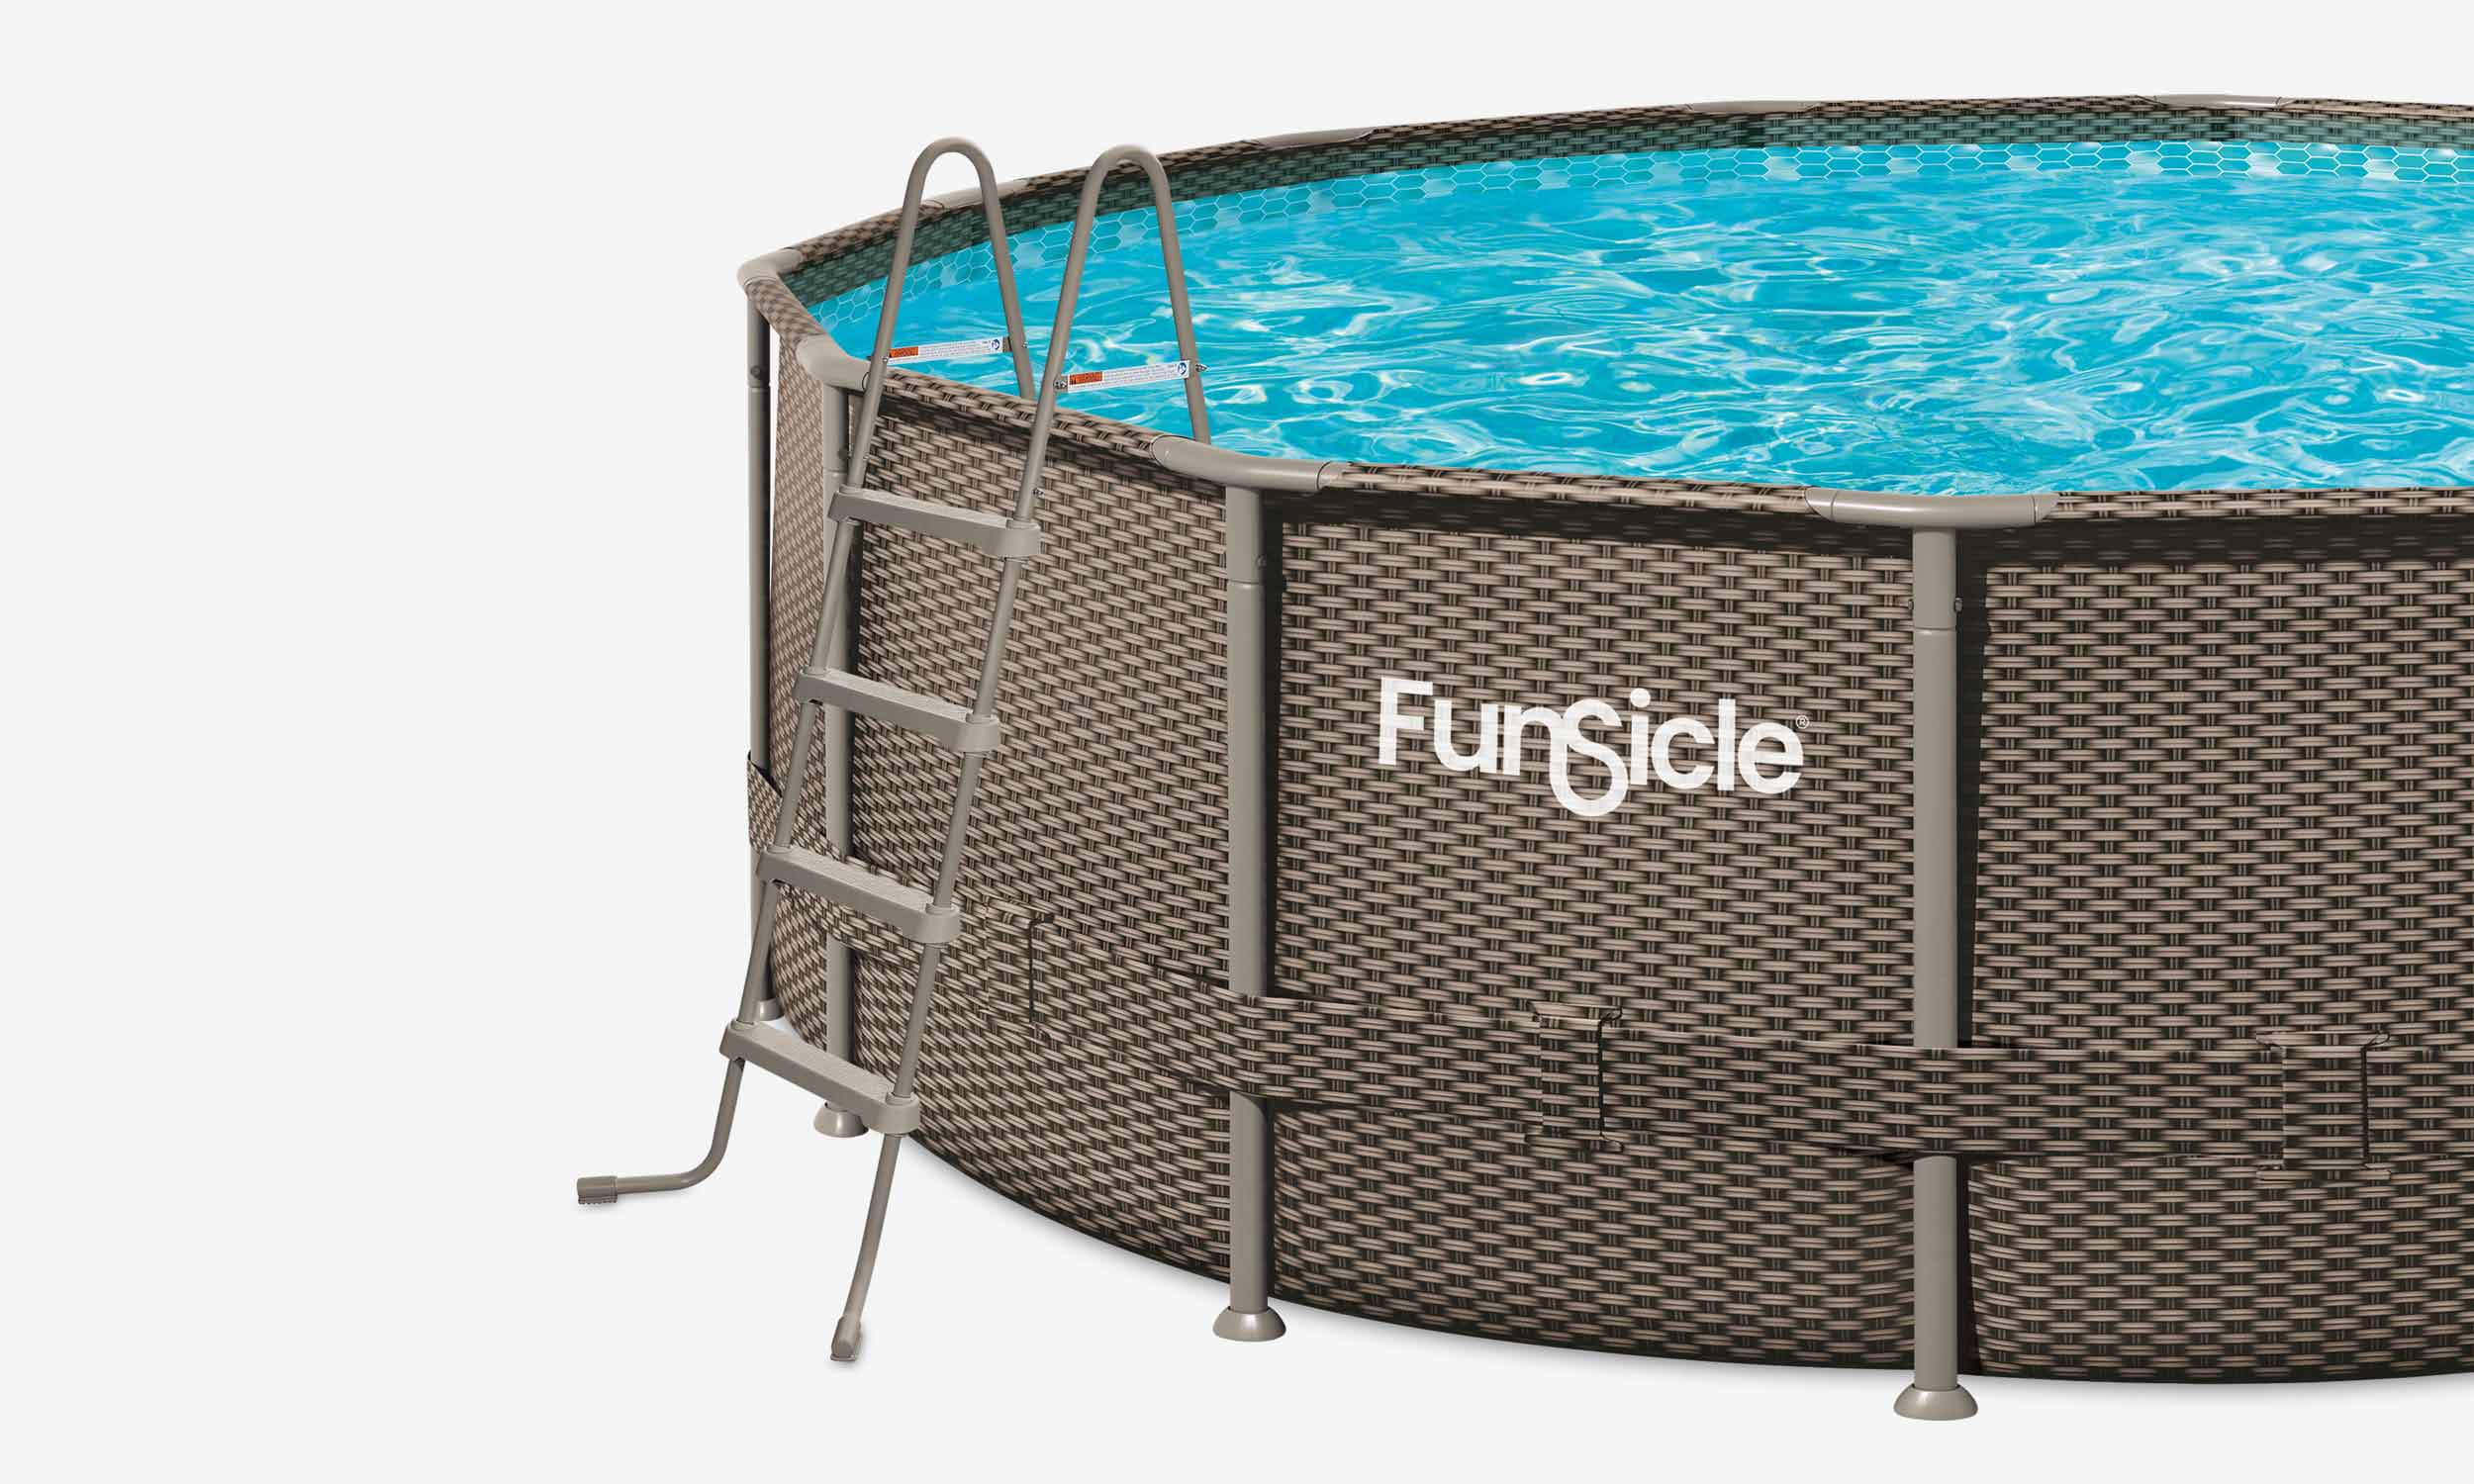 Funsicle 48" SureStep Ladder with a pool